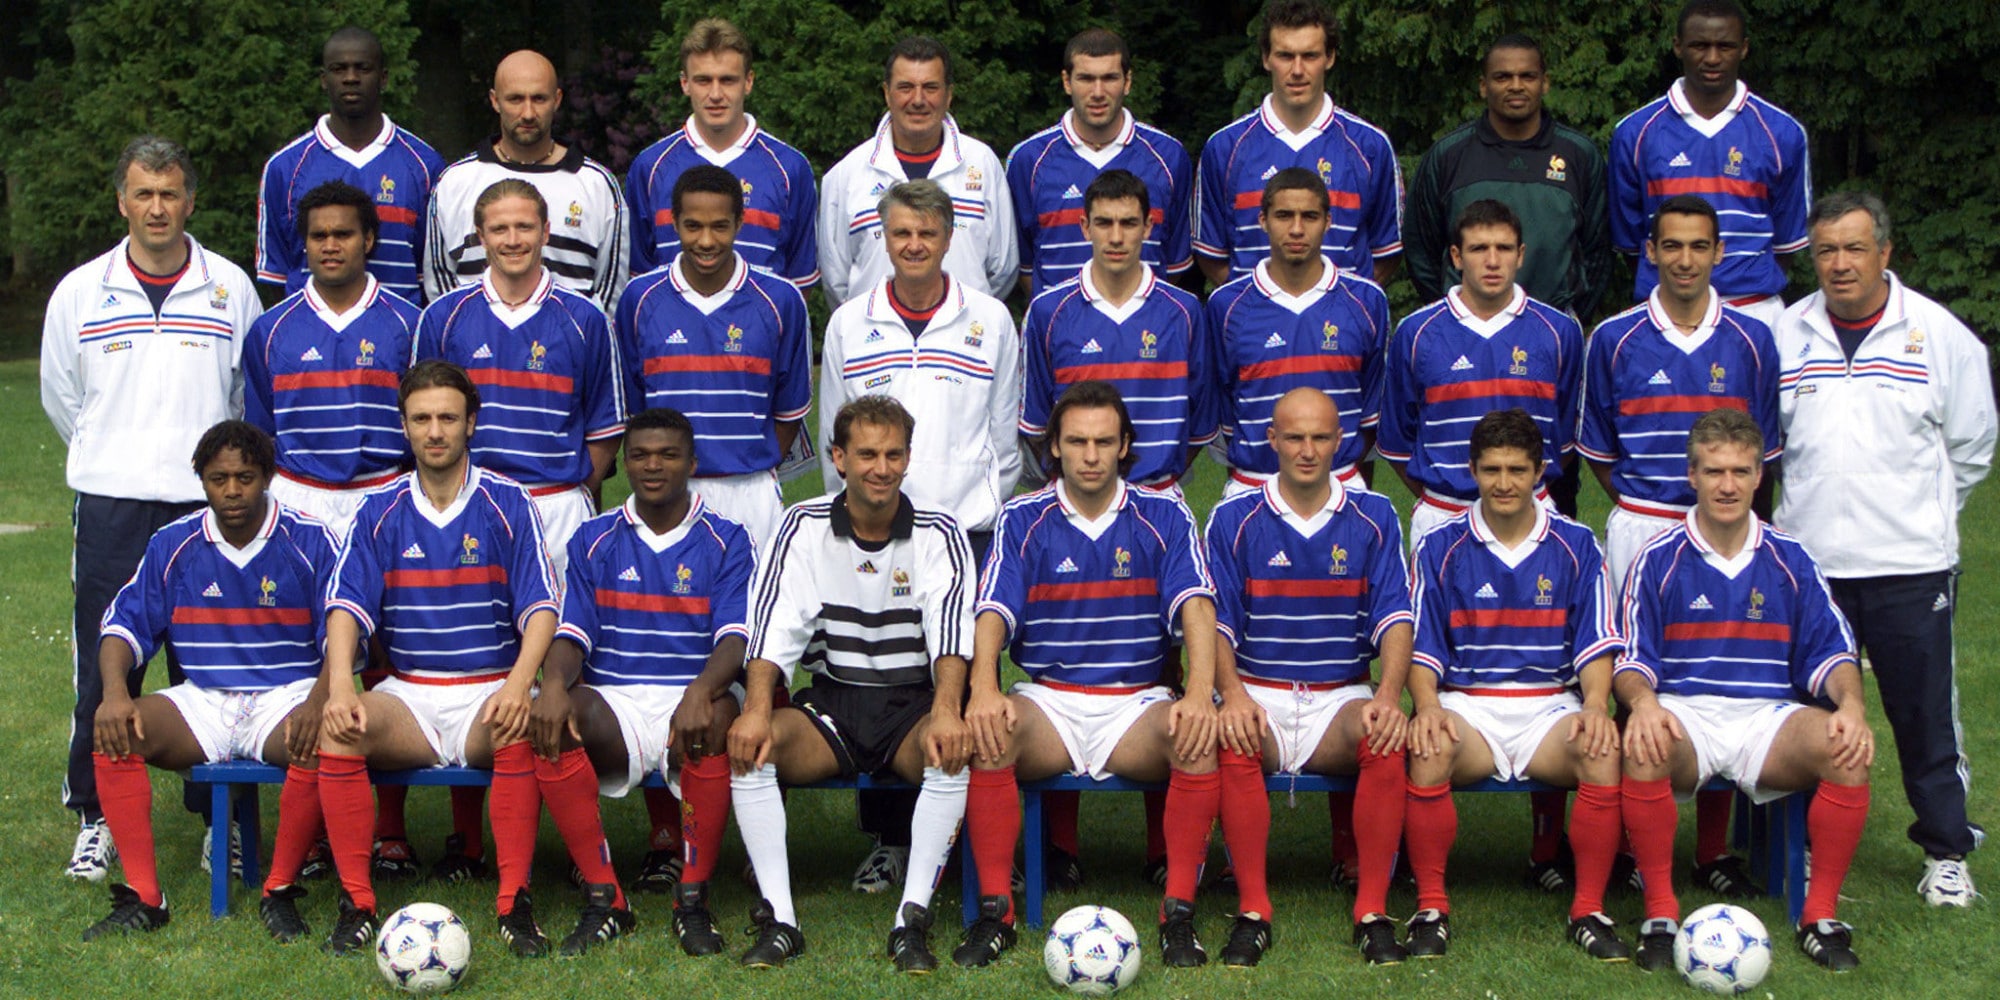 The French national soccer team poses for the official team picture at Clairfontaine